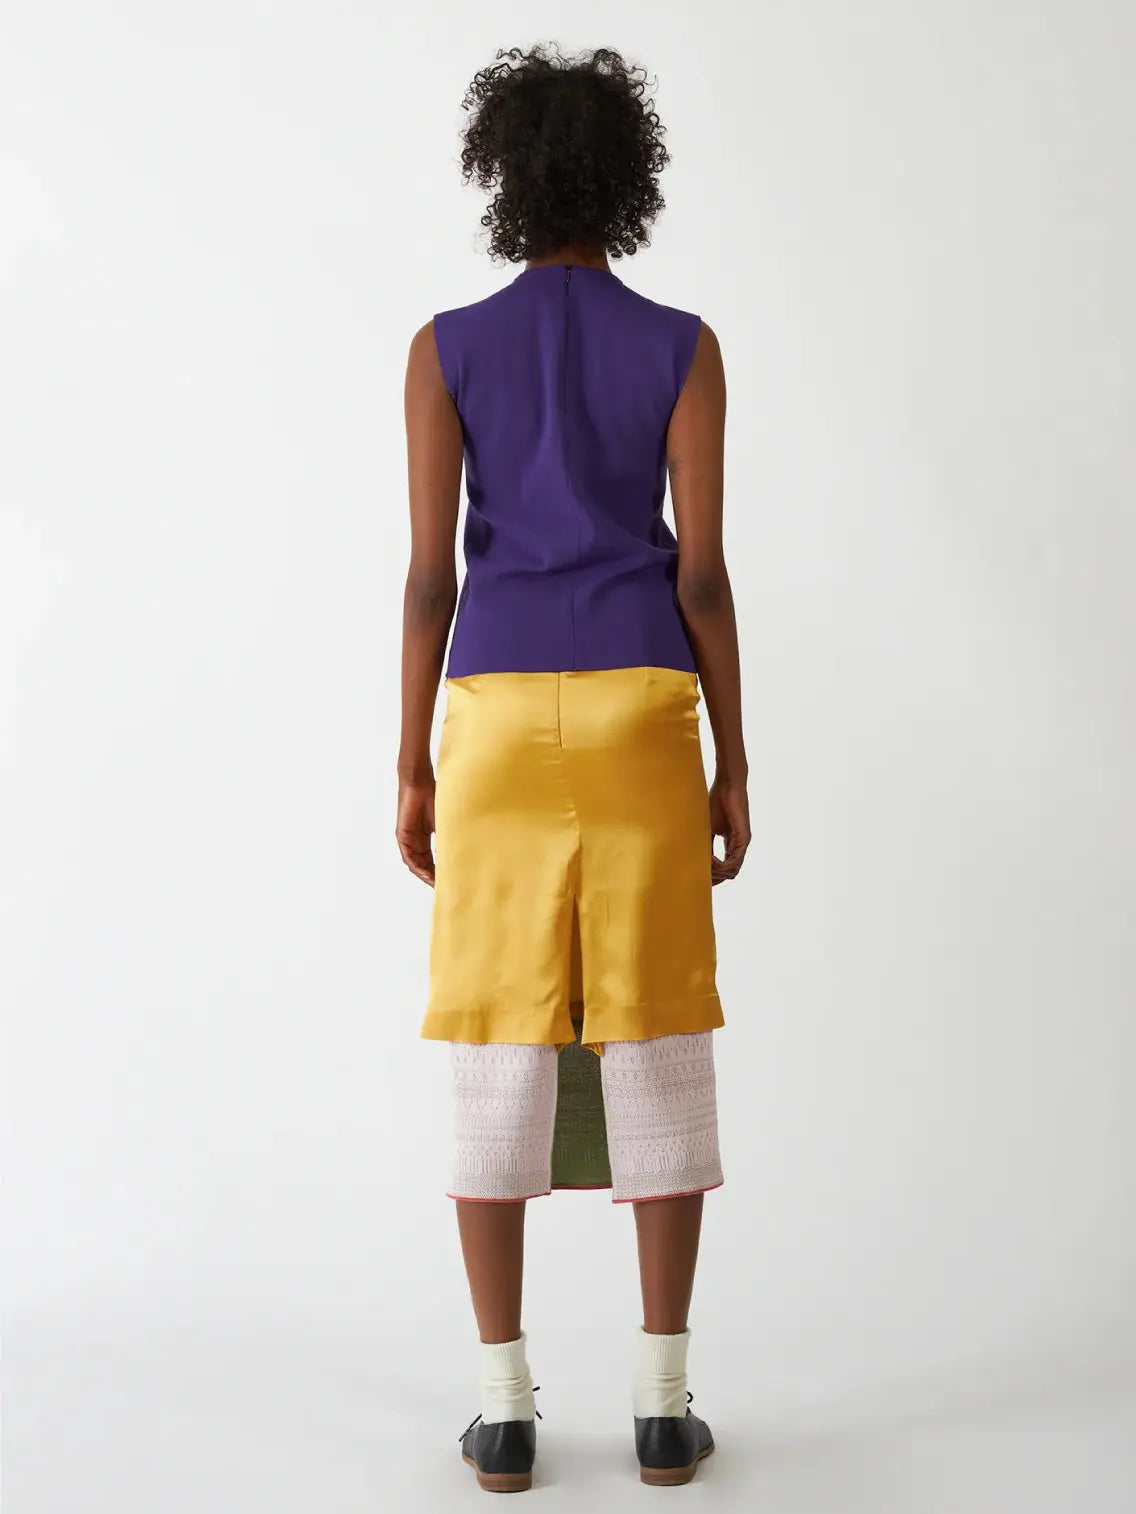 A sleeveless, dark purple top called the Neru Top Purple from Bielo is displayed on a plain white background from Bassalstore Barcelona. The top has a simple, straight cut with a high neckline and a zipper at the back.